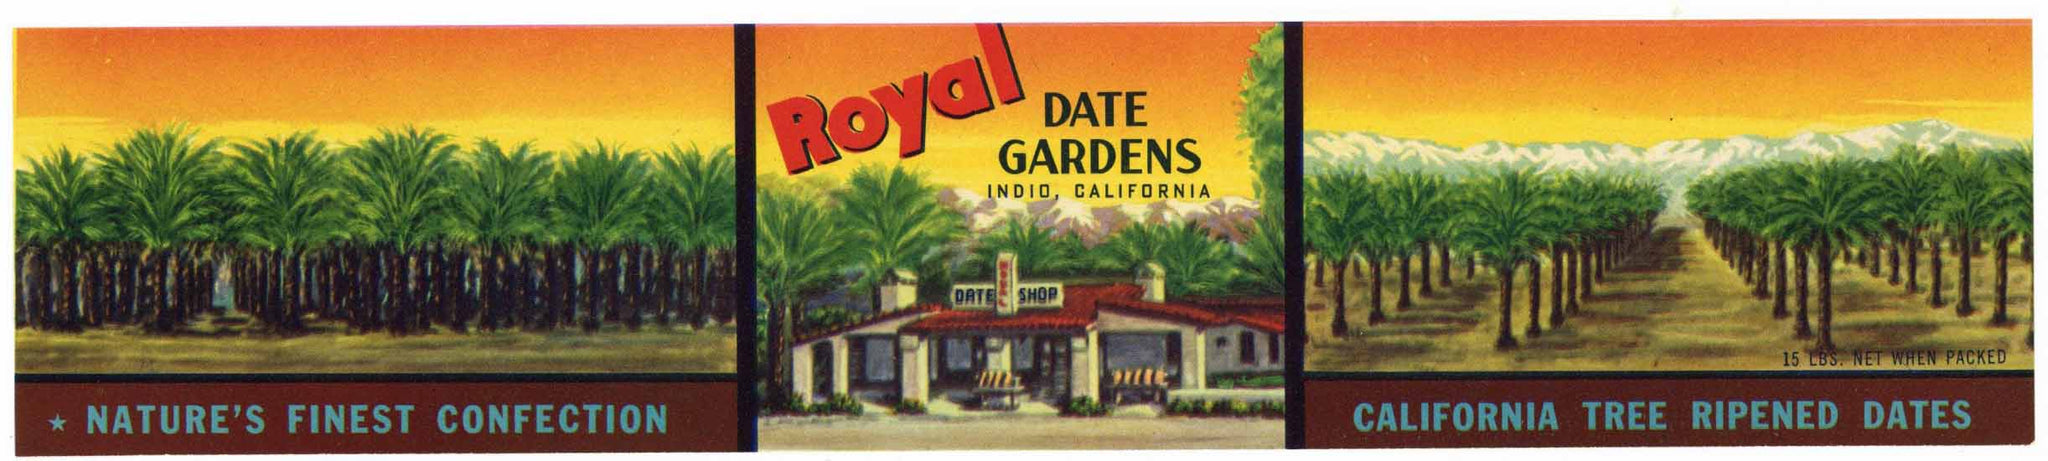 Royal Date Gardens Brand Vintage Indio California Date Crate Label